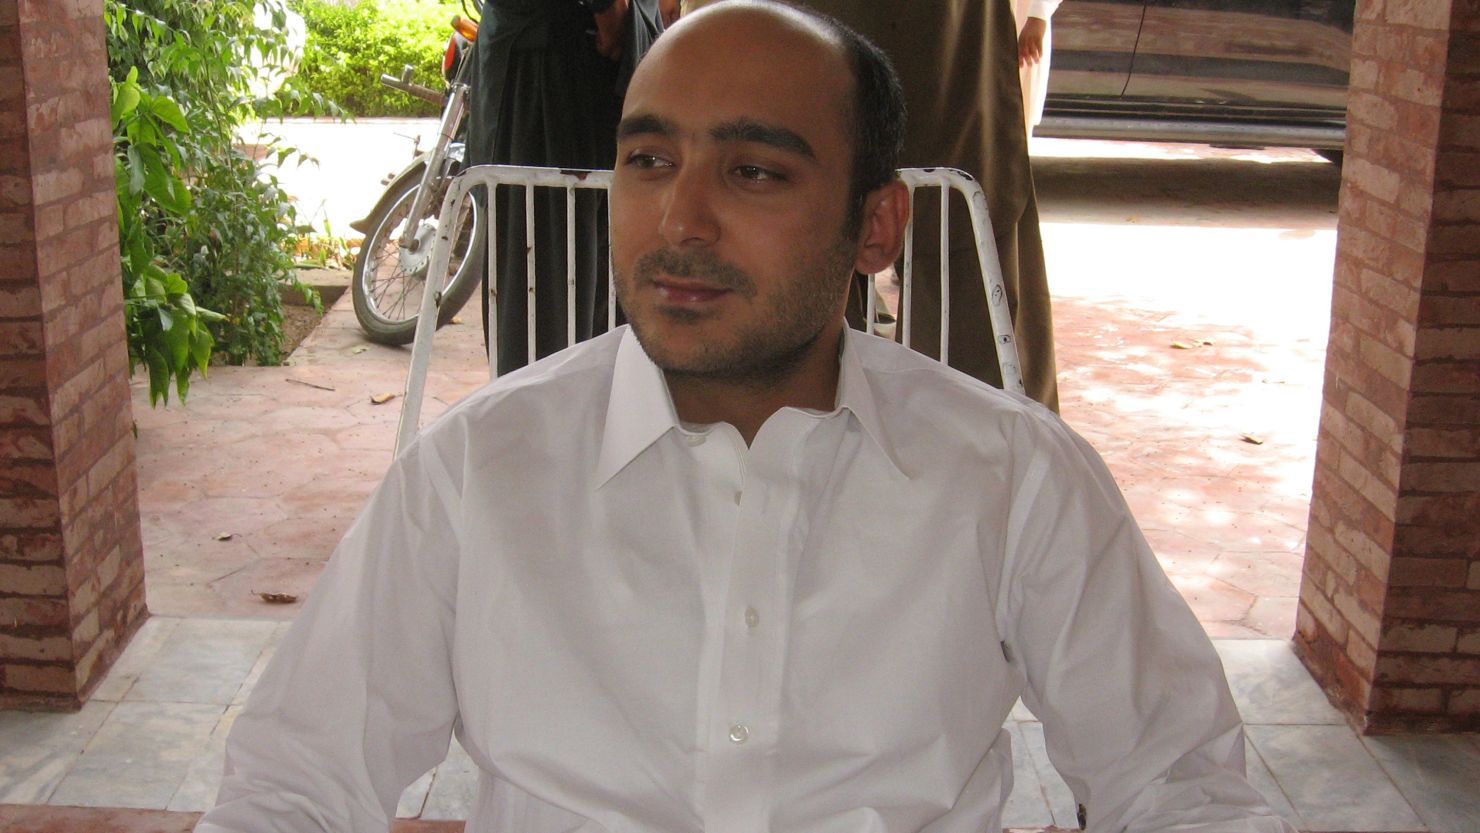 Ali Haider Gilani, the son of a former Pakistani leader, appears shortly before his 2013 kidnapping.